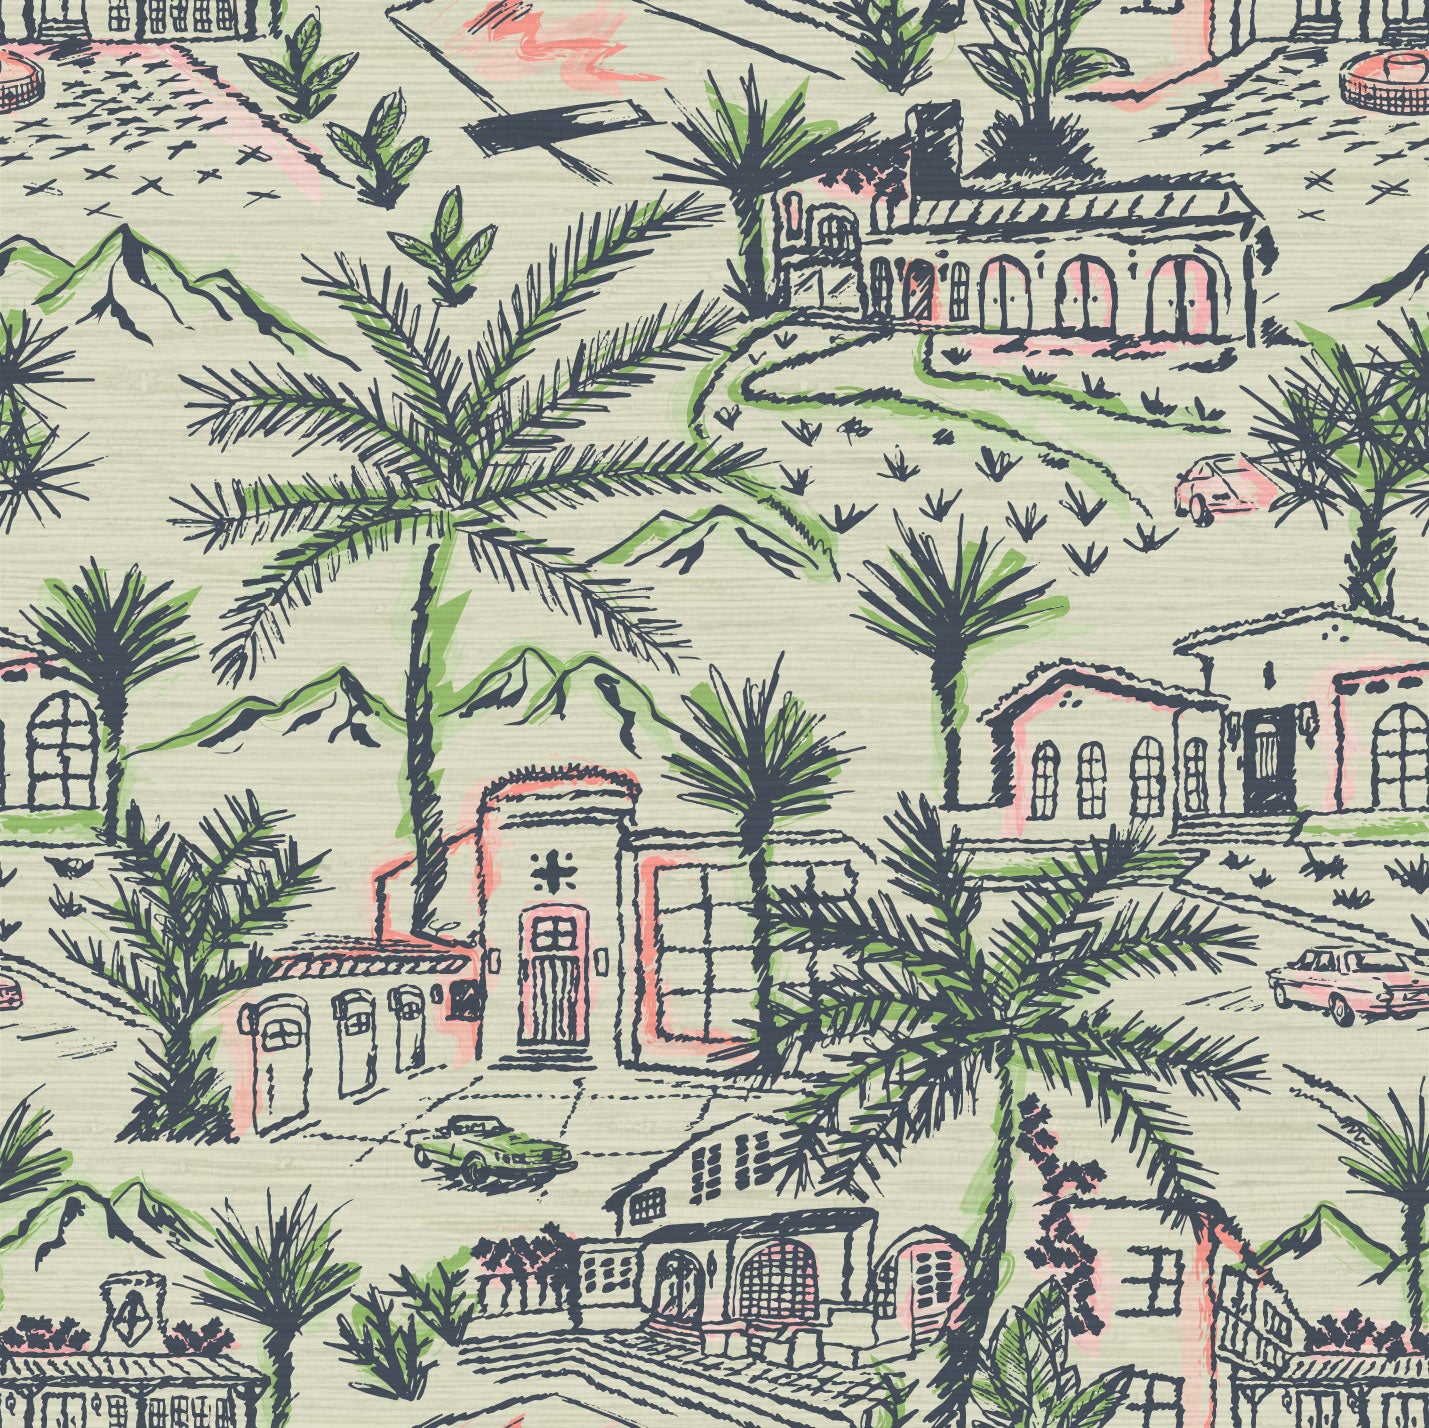 grasscloth wallpaper in modern toile print with Spanish style architecture houses, palm trees, pools, 1980s vintage cars mountains in the background. The print is a light green base with dark green, bright neon green and splashes of neon coral print